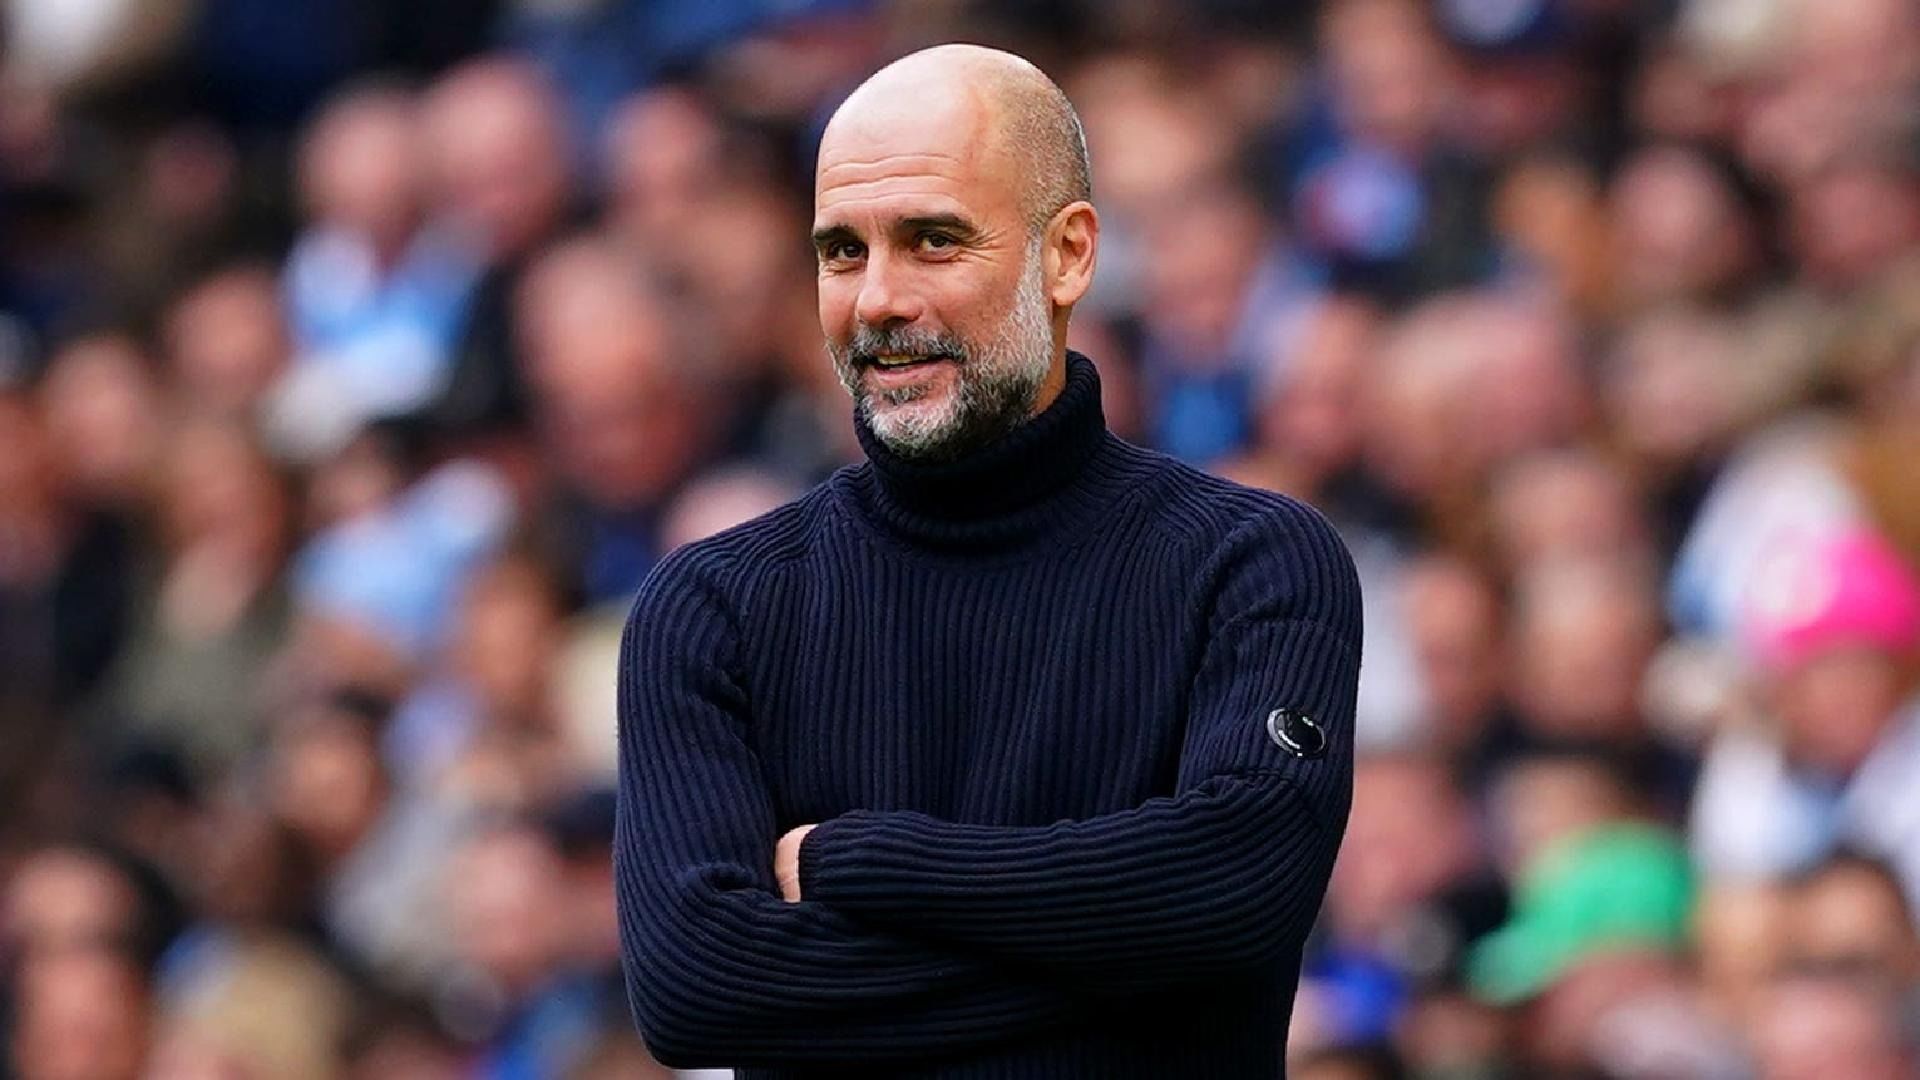 Manchester City Plans Long-Term Contract Extension With Guardiola